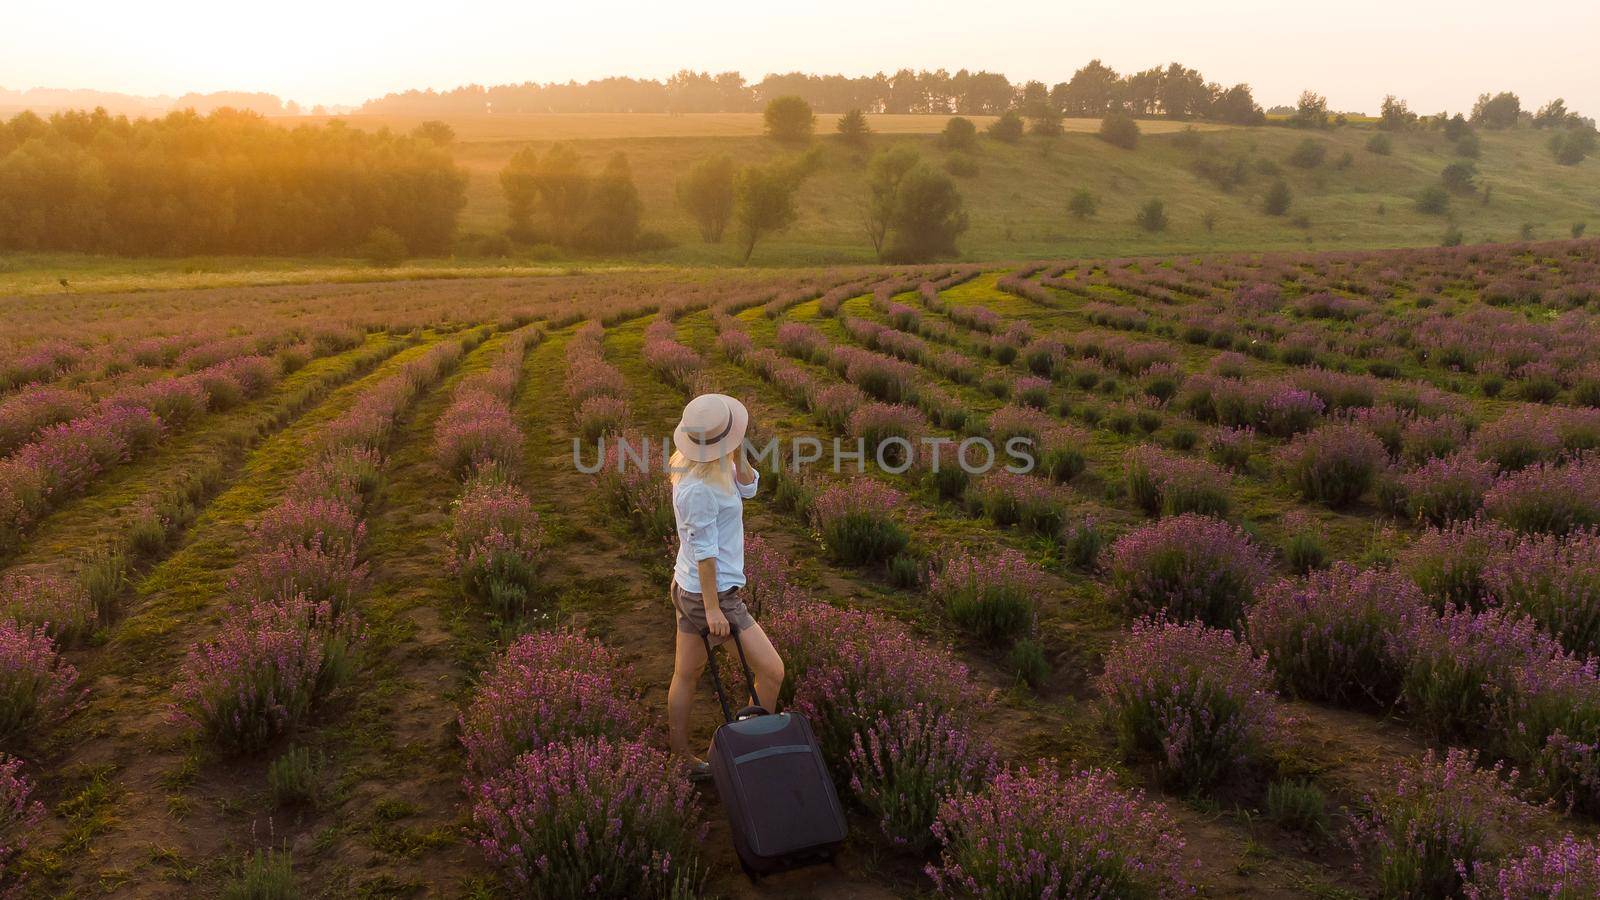 women with a suitcase and lavender field